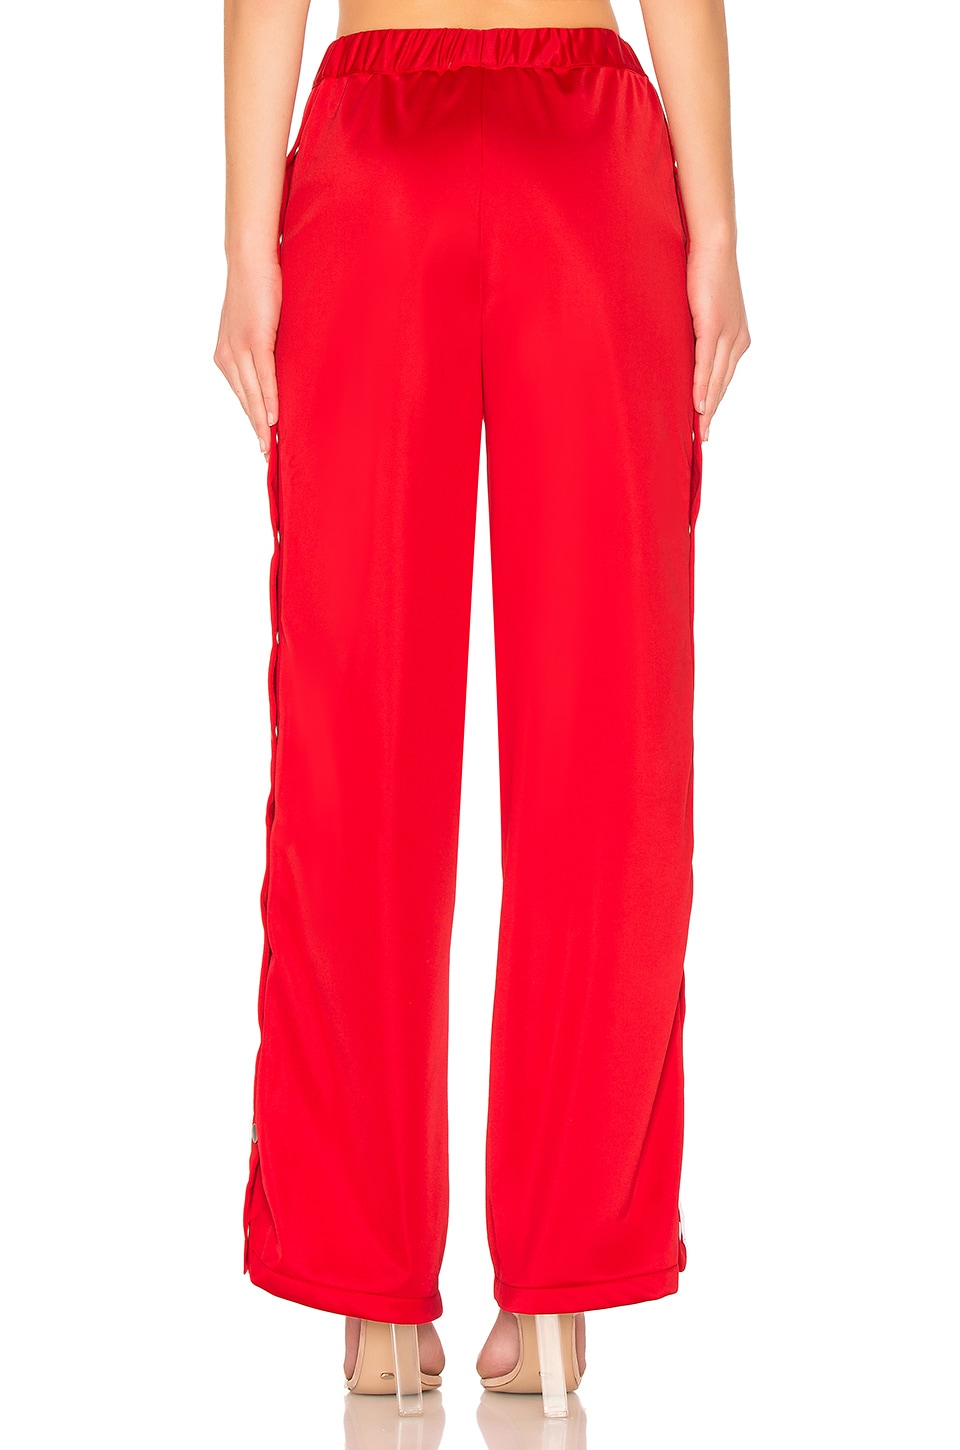 Lovers + Friends Athletic Snap Track Pant in Red & White | REVOLVE